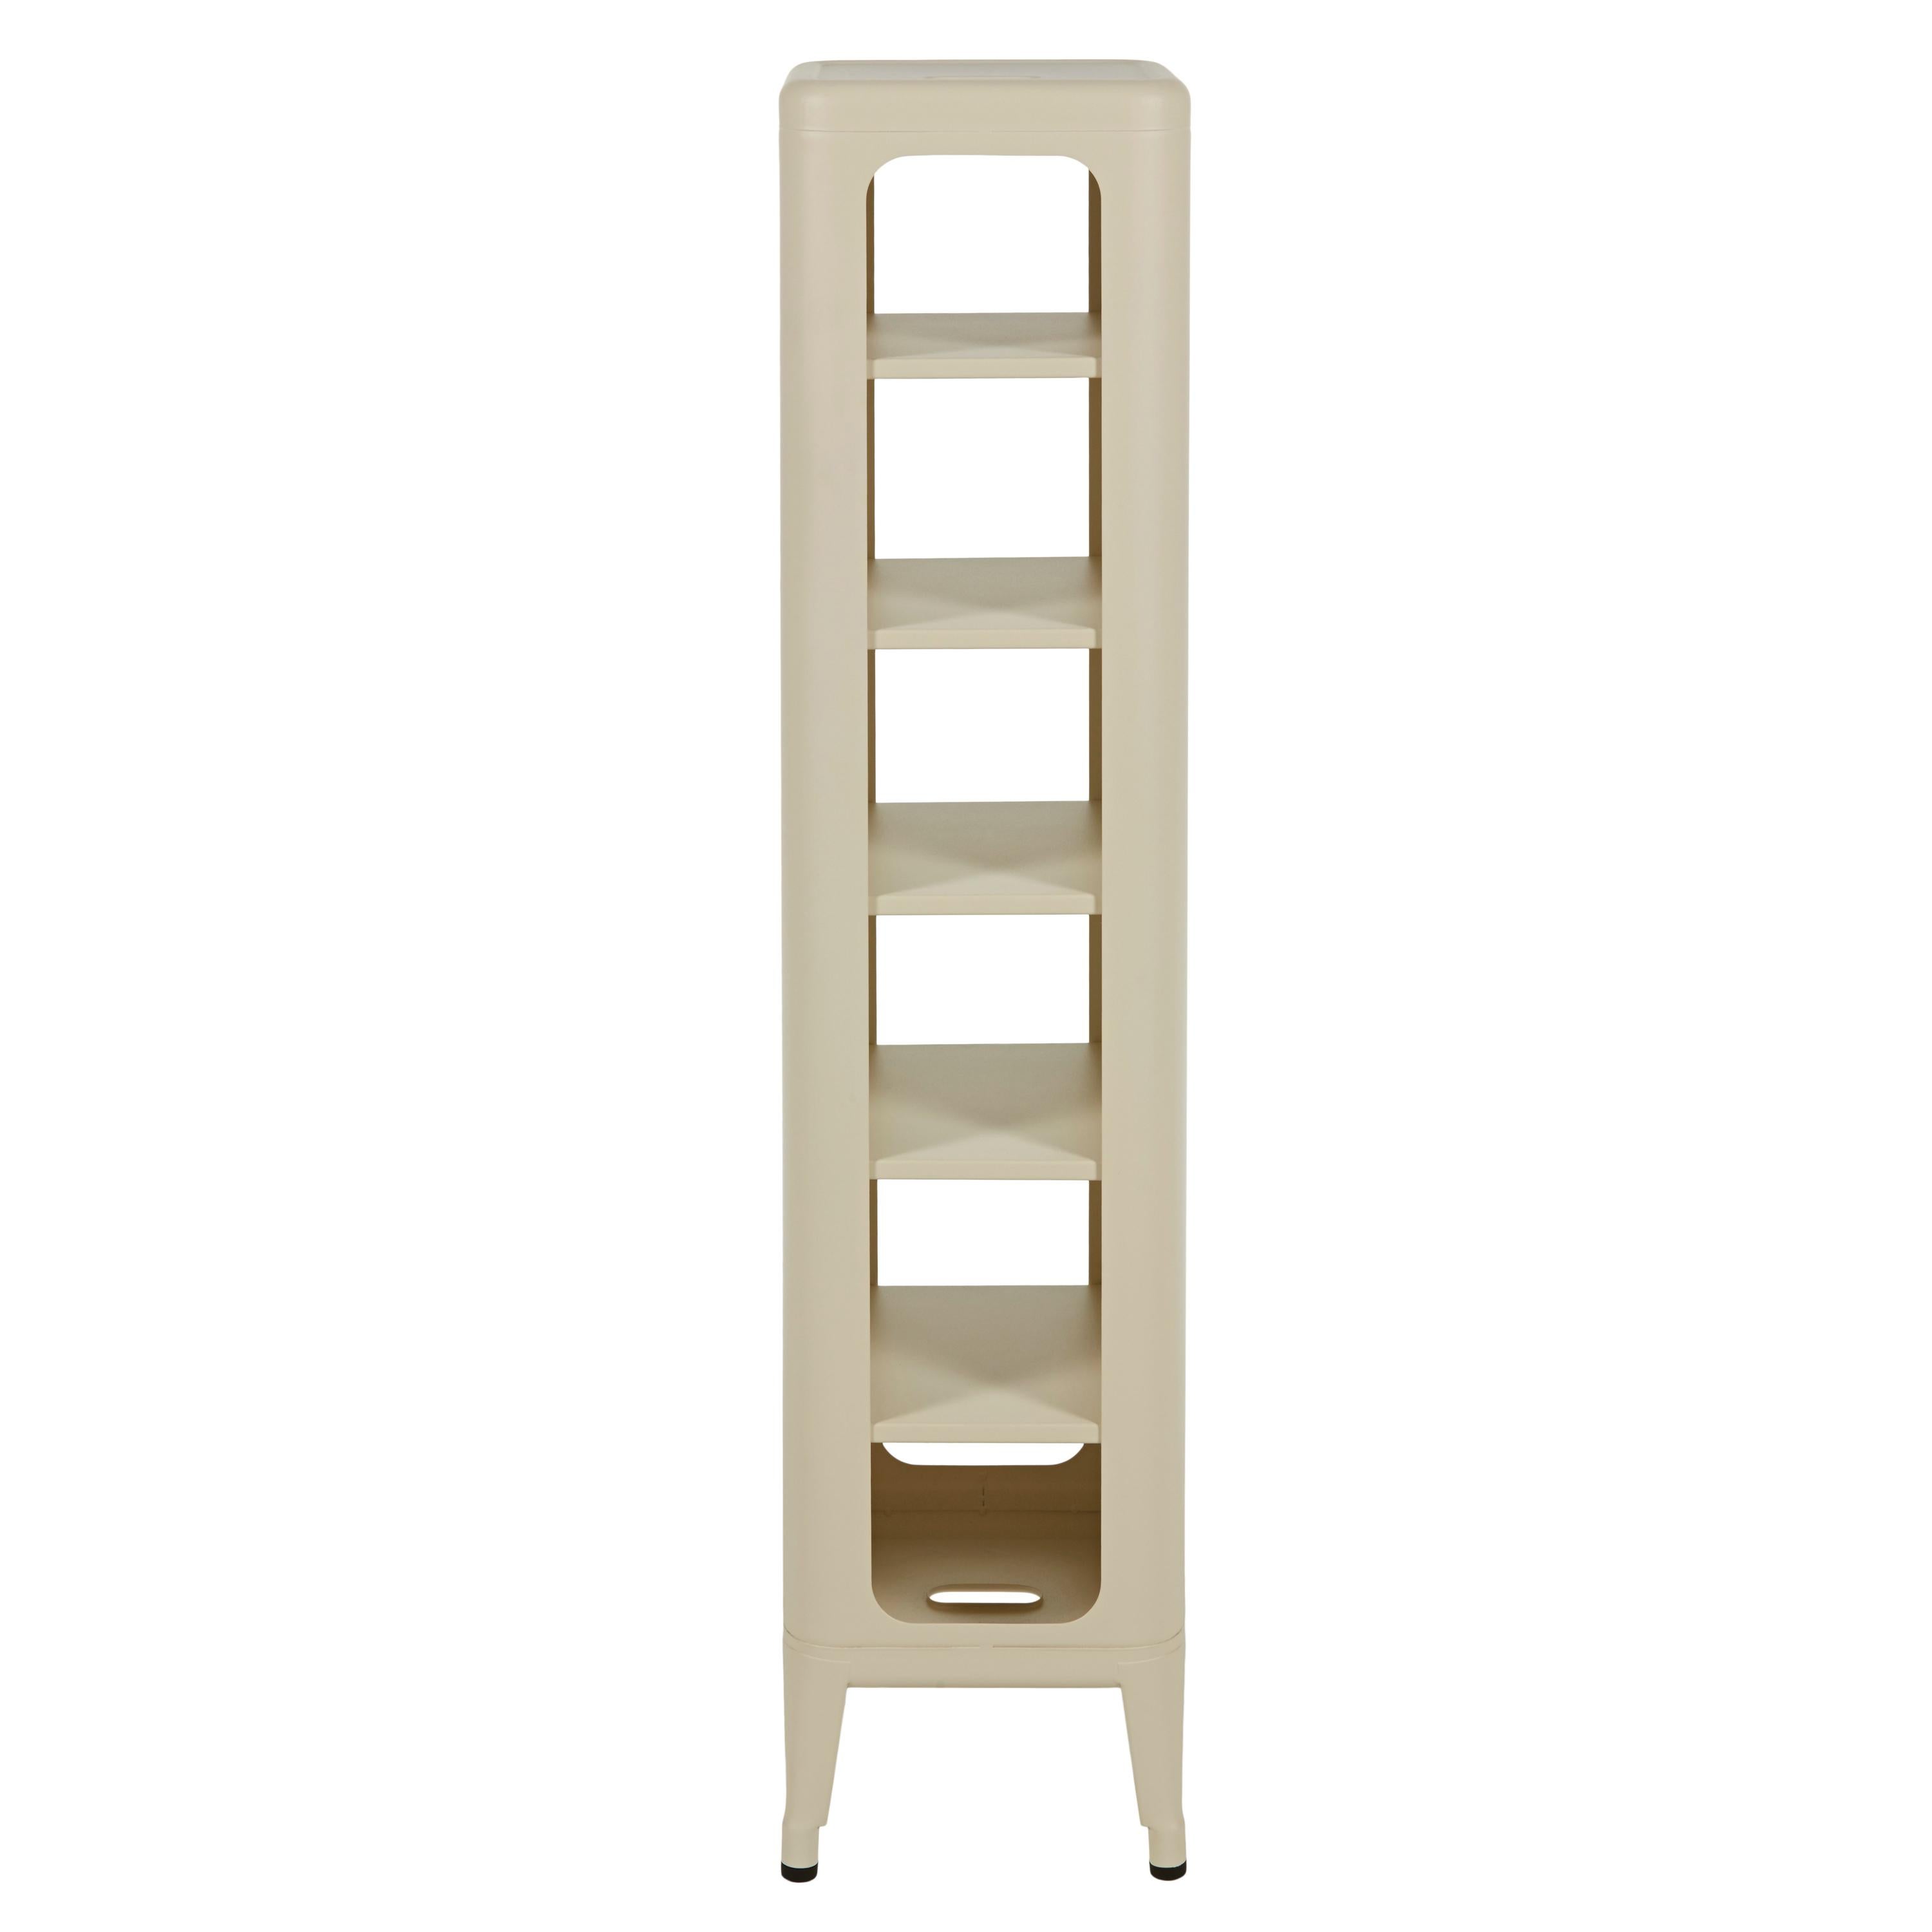 For Sale: White (Ivoire) Stool Shelf 1335 in Essential Colors by Frederic Gaunet & Tolix